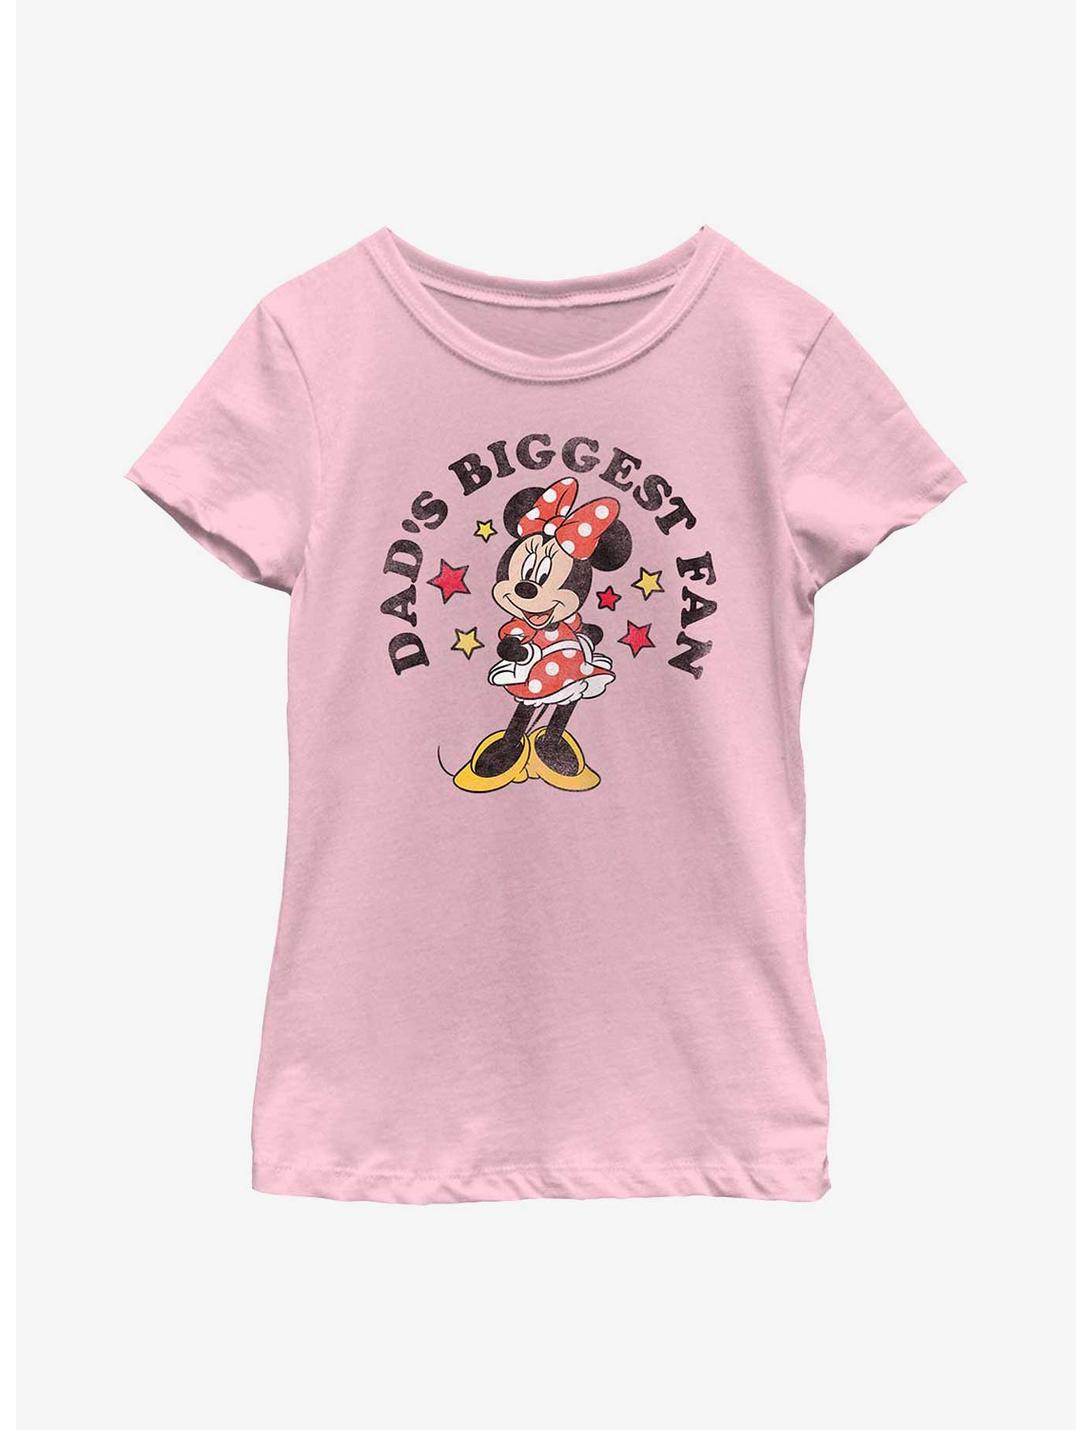 Disney Minnie Mouse Dad's Biggest Fan Youth Girls T-Shirt, PINK, hi-res